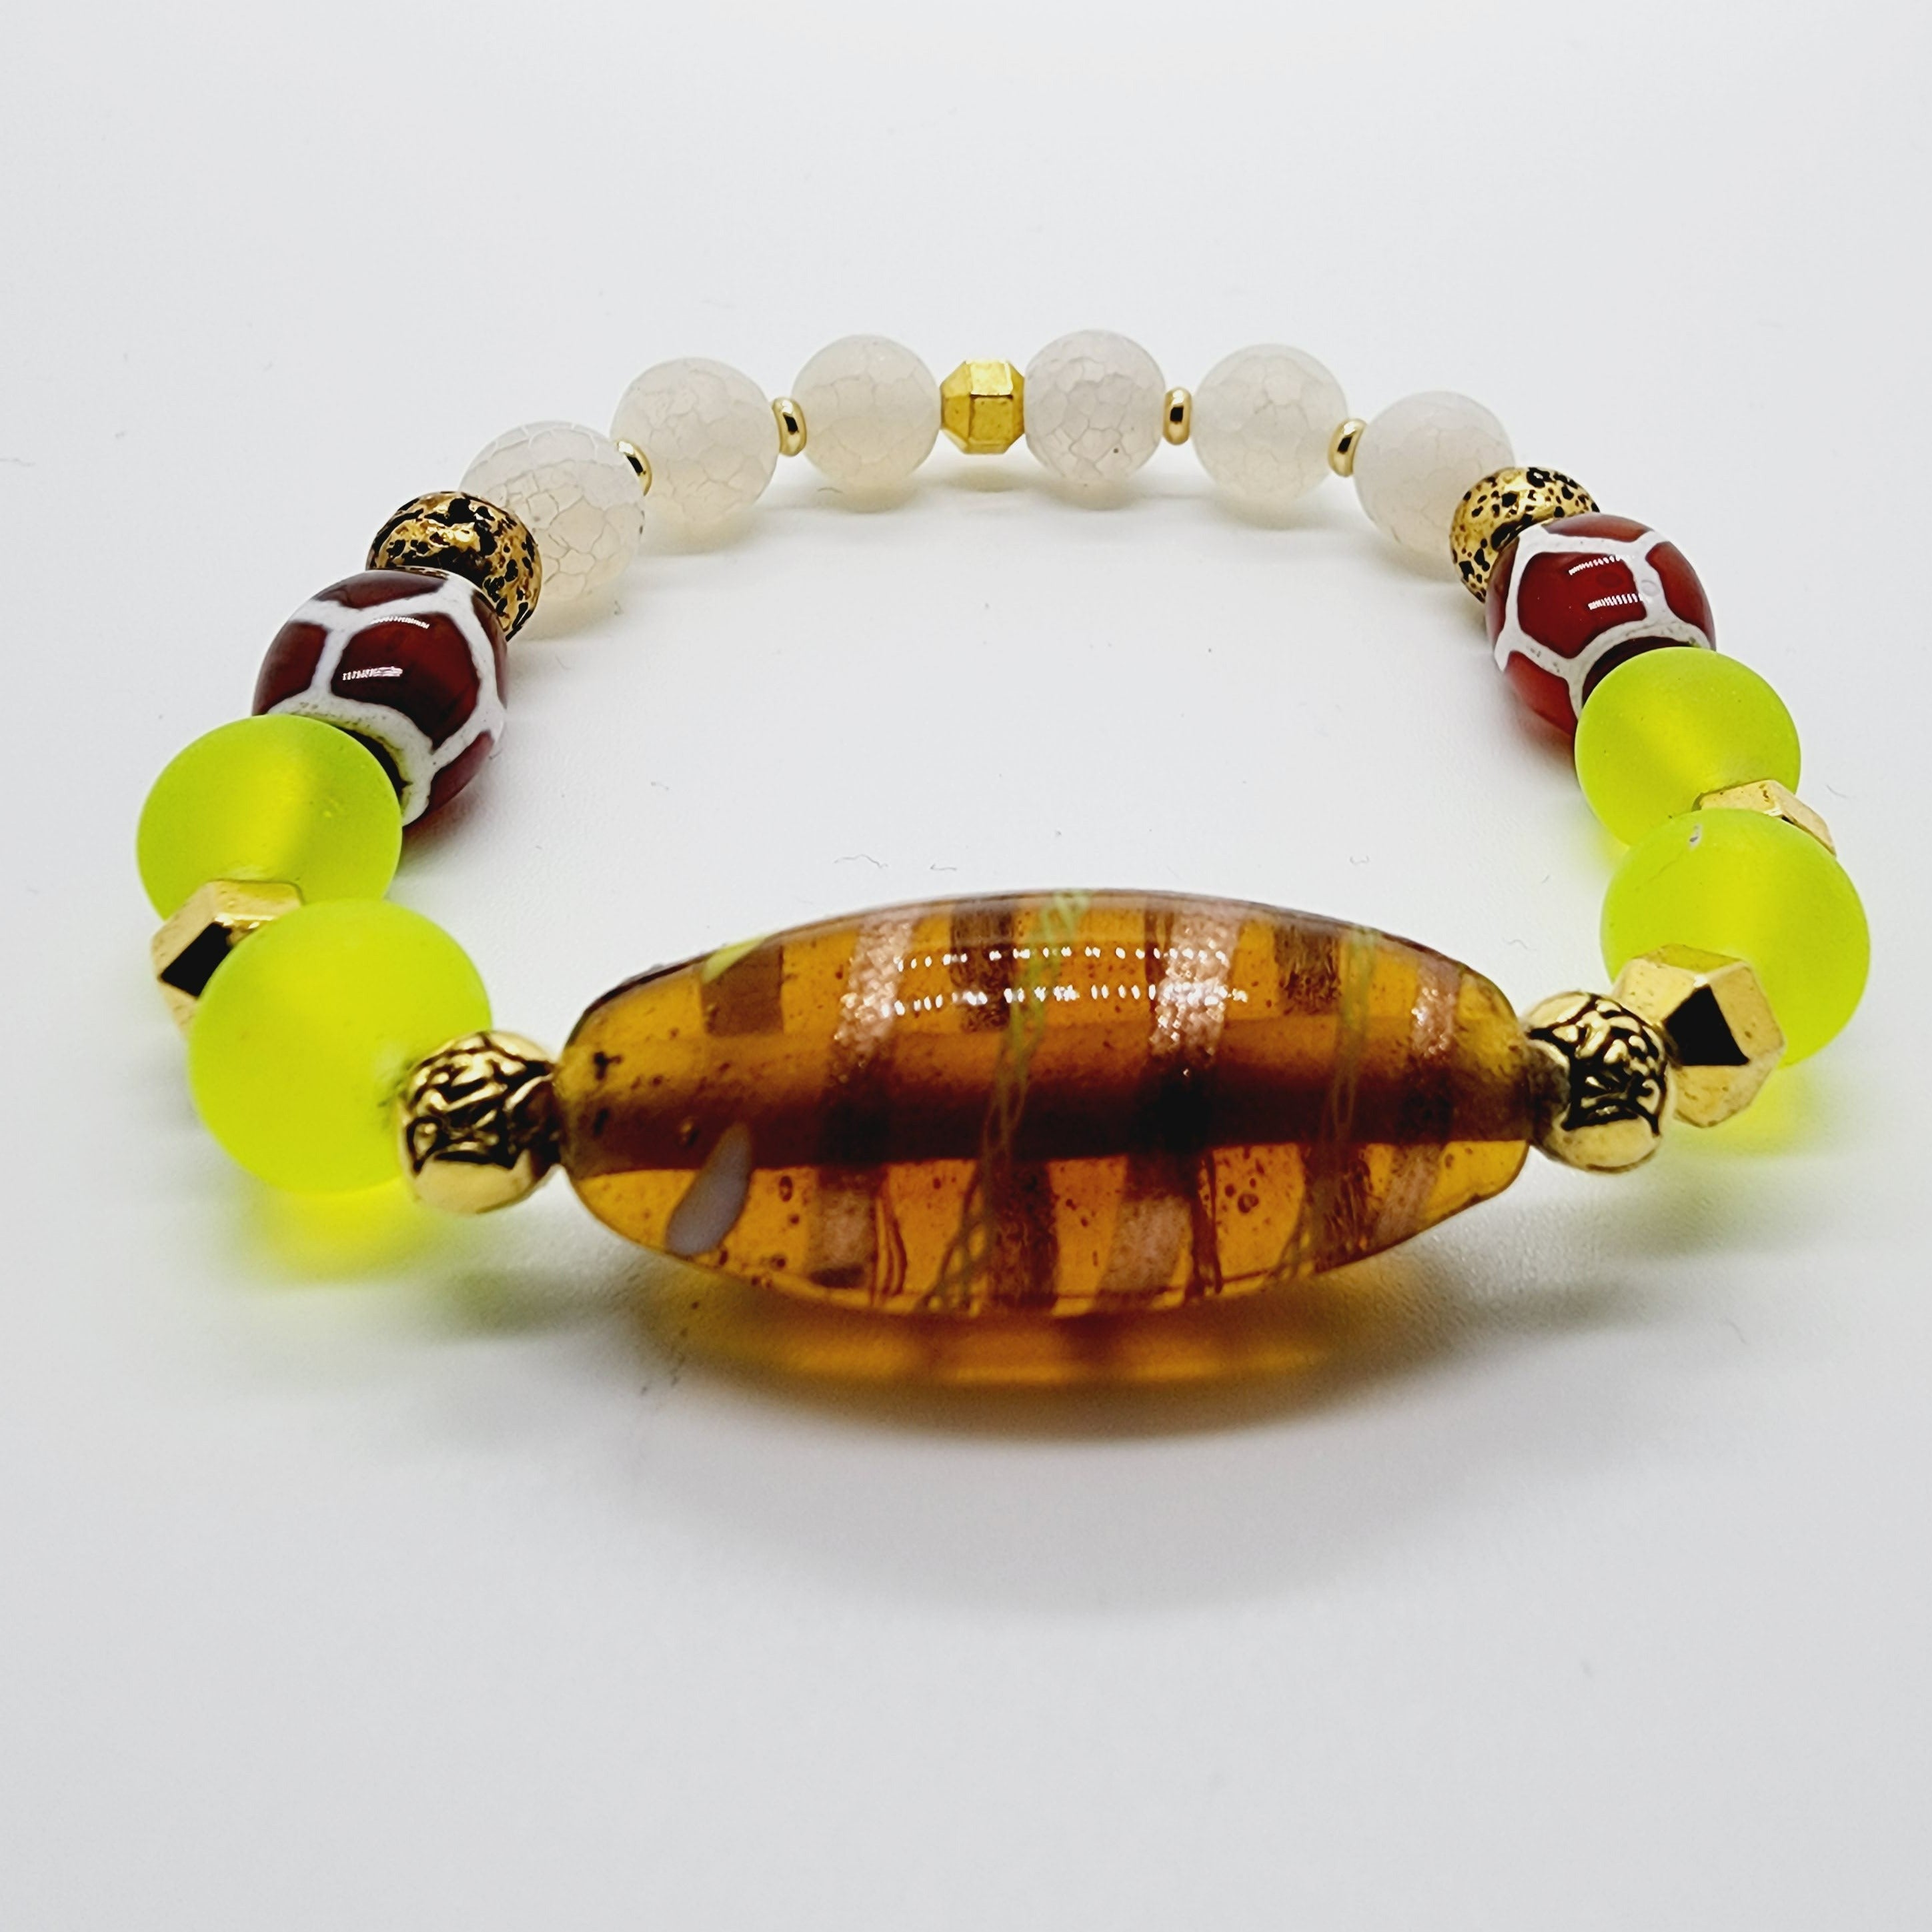 Length: 7.5 inches | Weight: 1.1 ounces  Distinctly You! This bracelet is handmade using citron beads, tan and white beads, and, frosted crackle beads, lamp post spacers, and bracelet uses 8mm latex free clear stretch cord. 